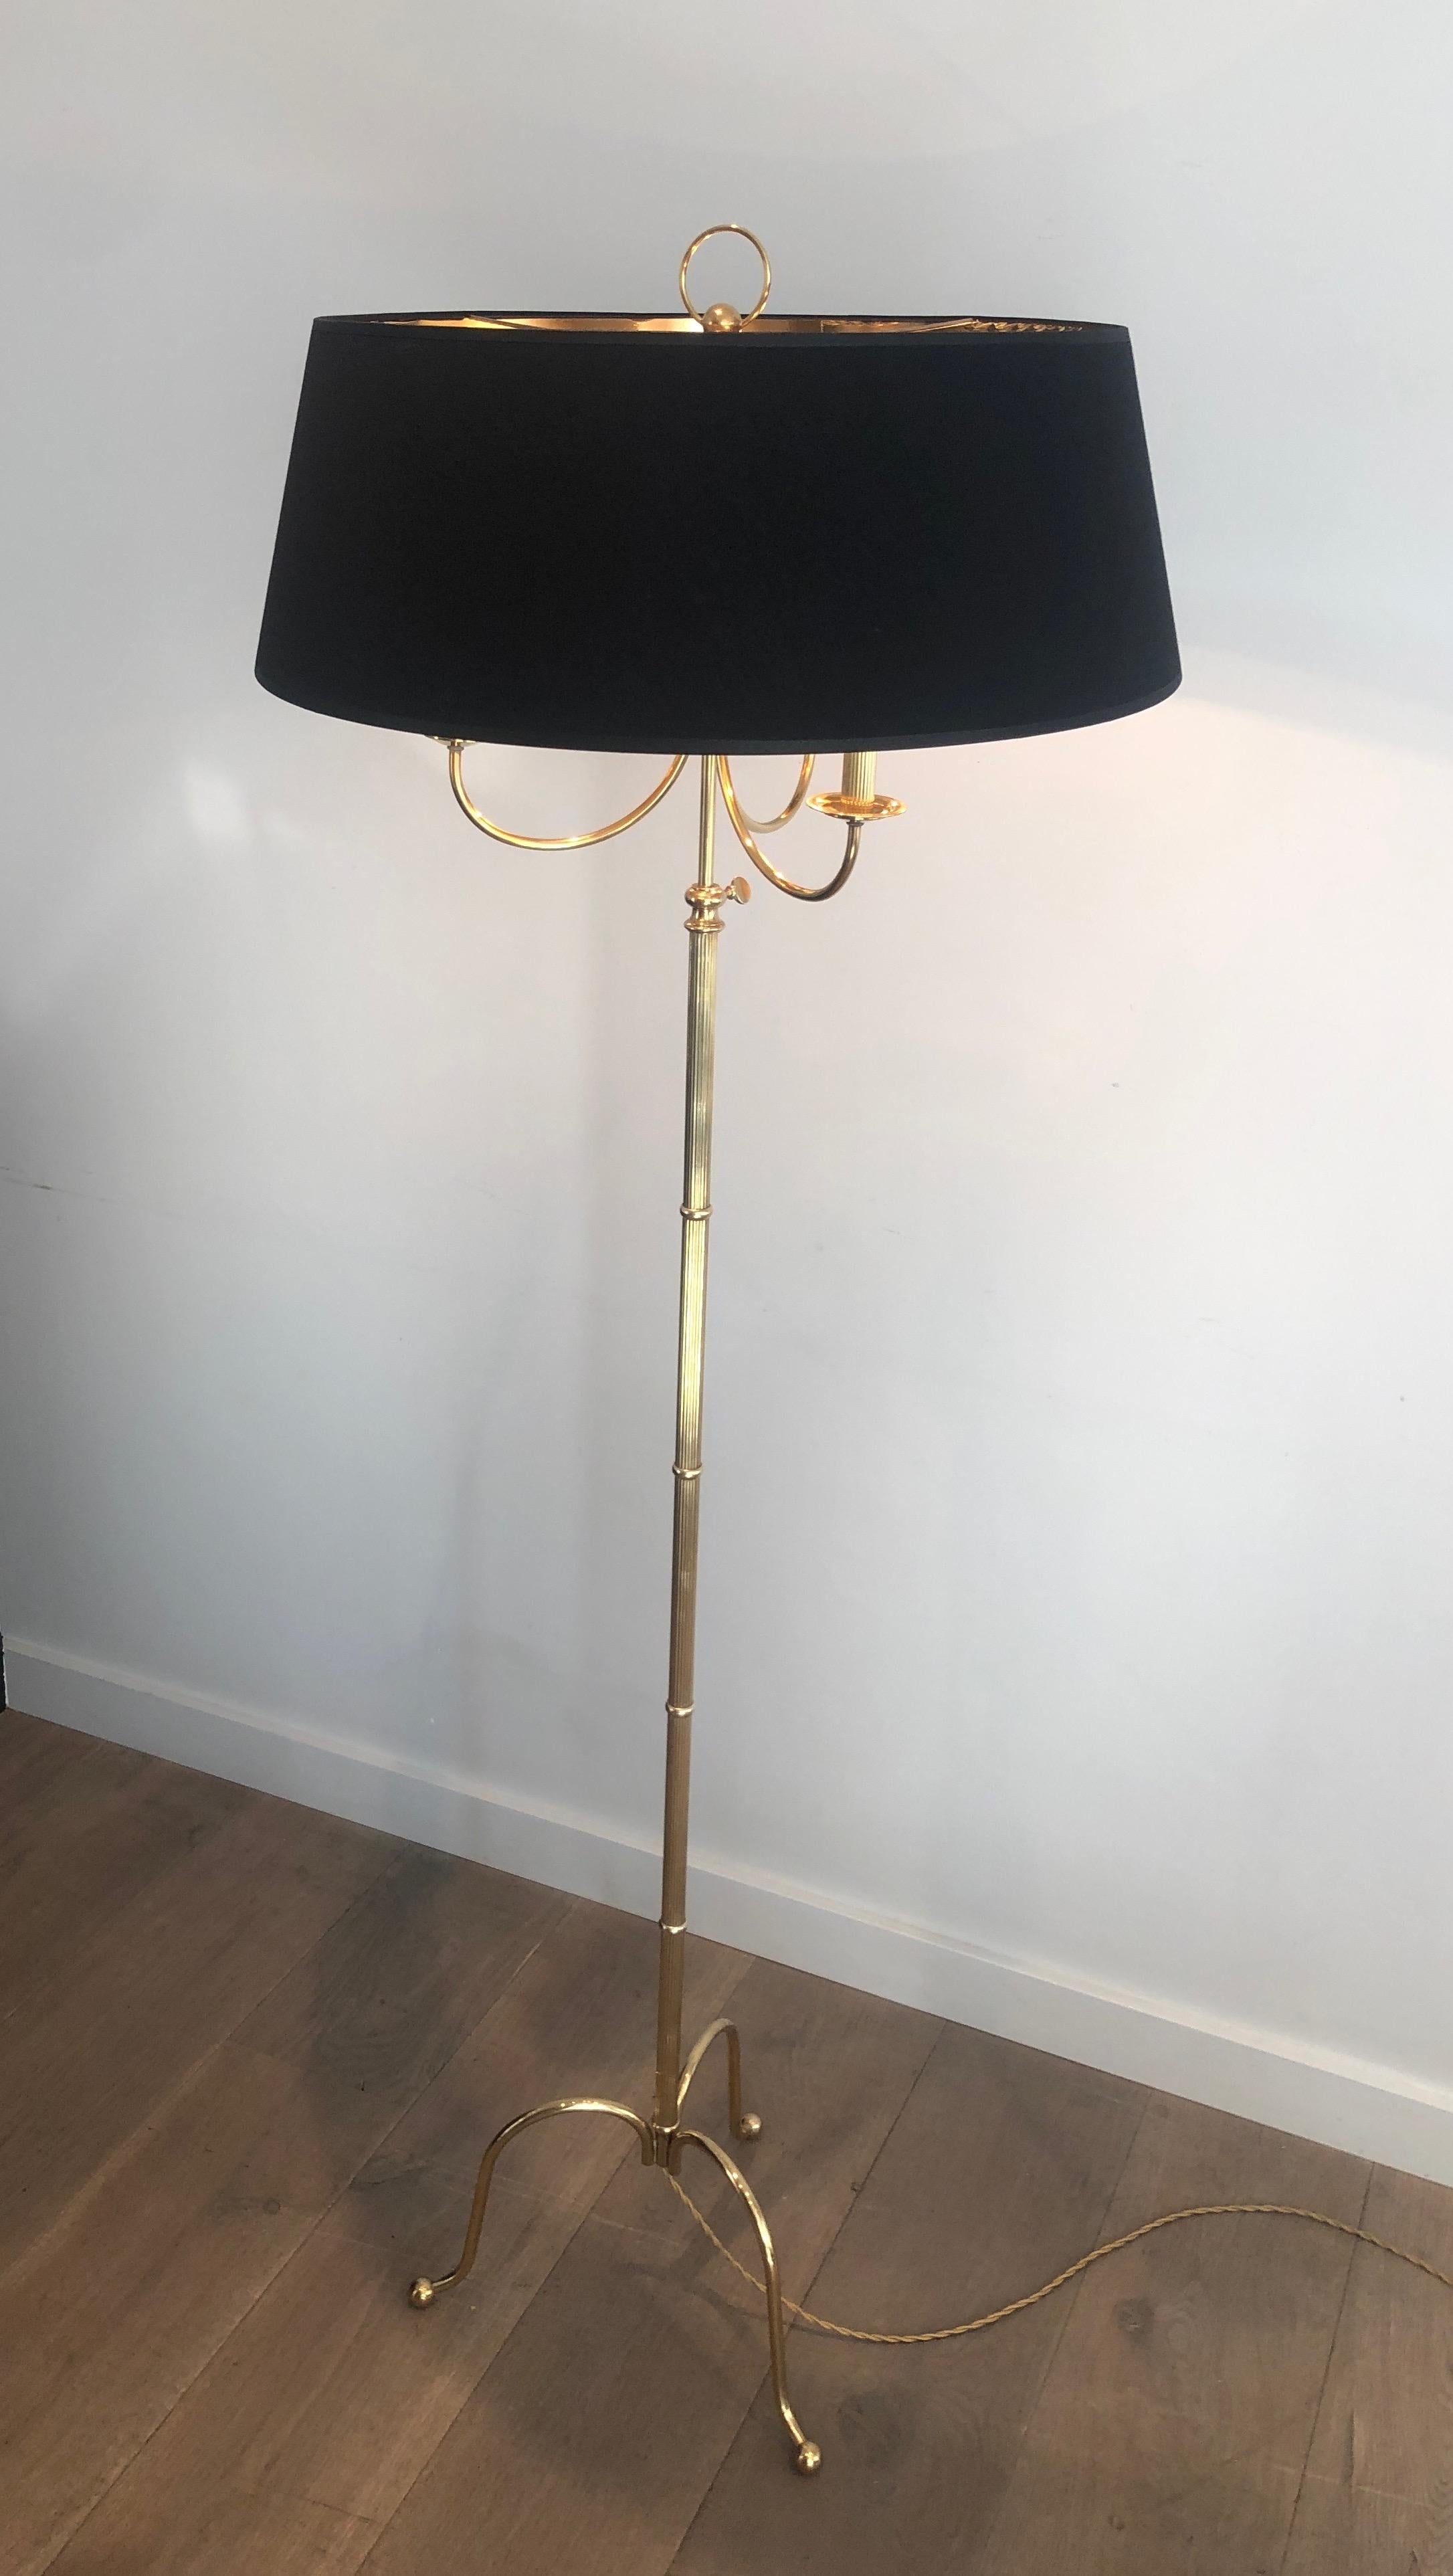 Tripode Brass Floor Lamp with 3 Arms, French Work by Maison Jansen For Sale 14